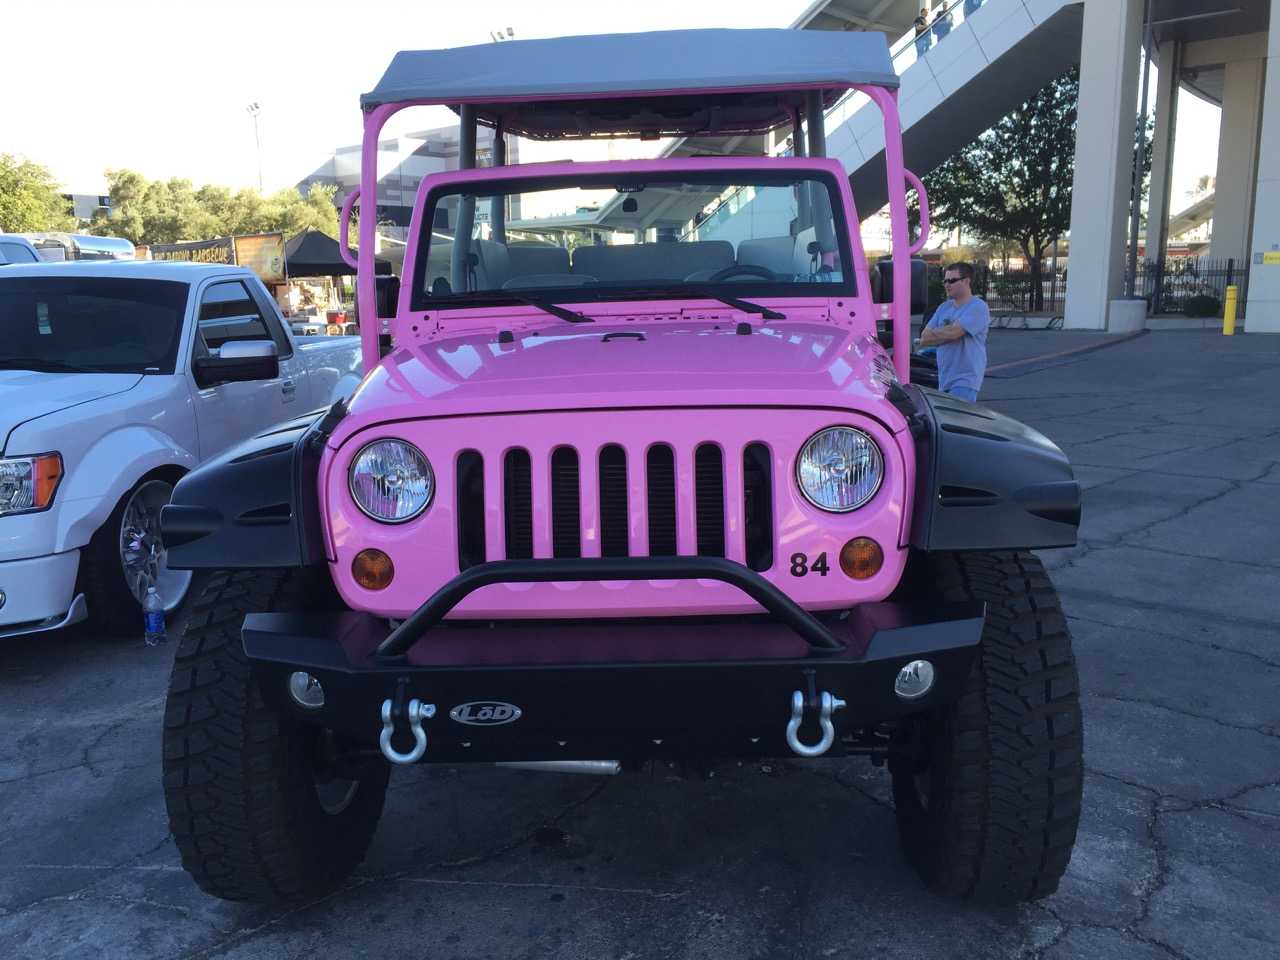 The pink Jeep Wrangler is designed specifically for Pink... 